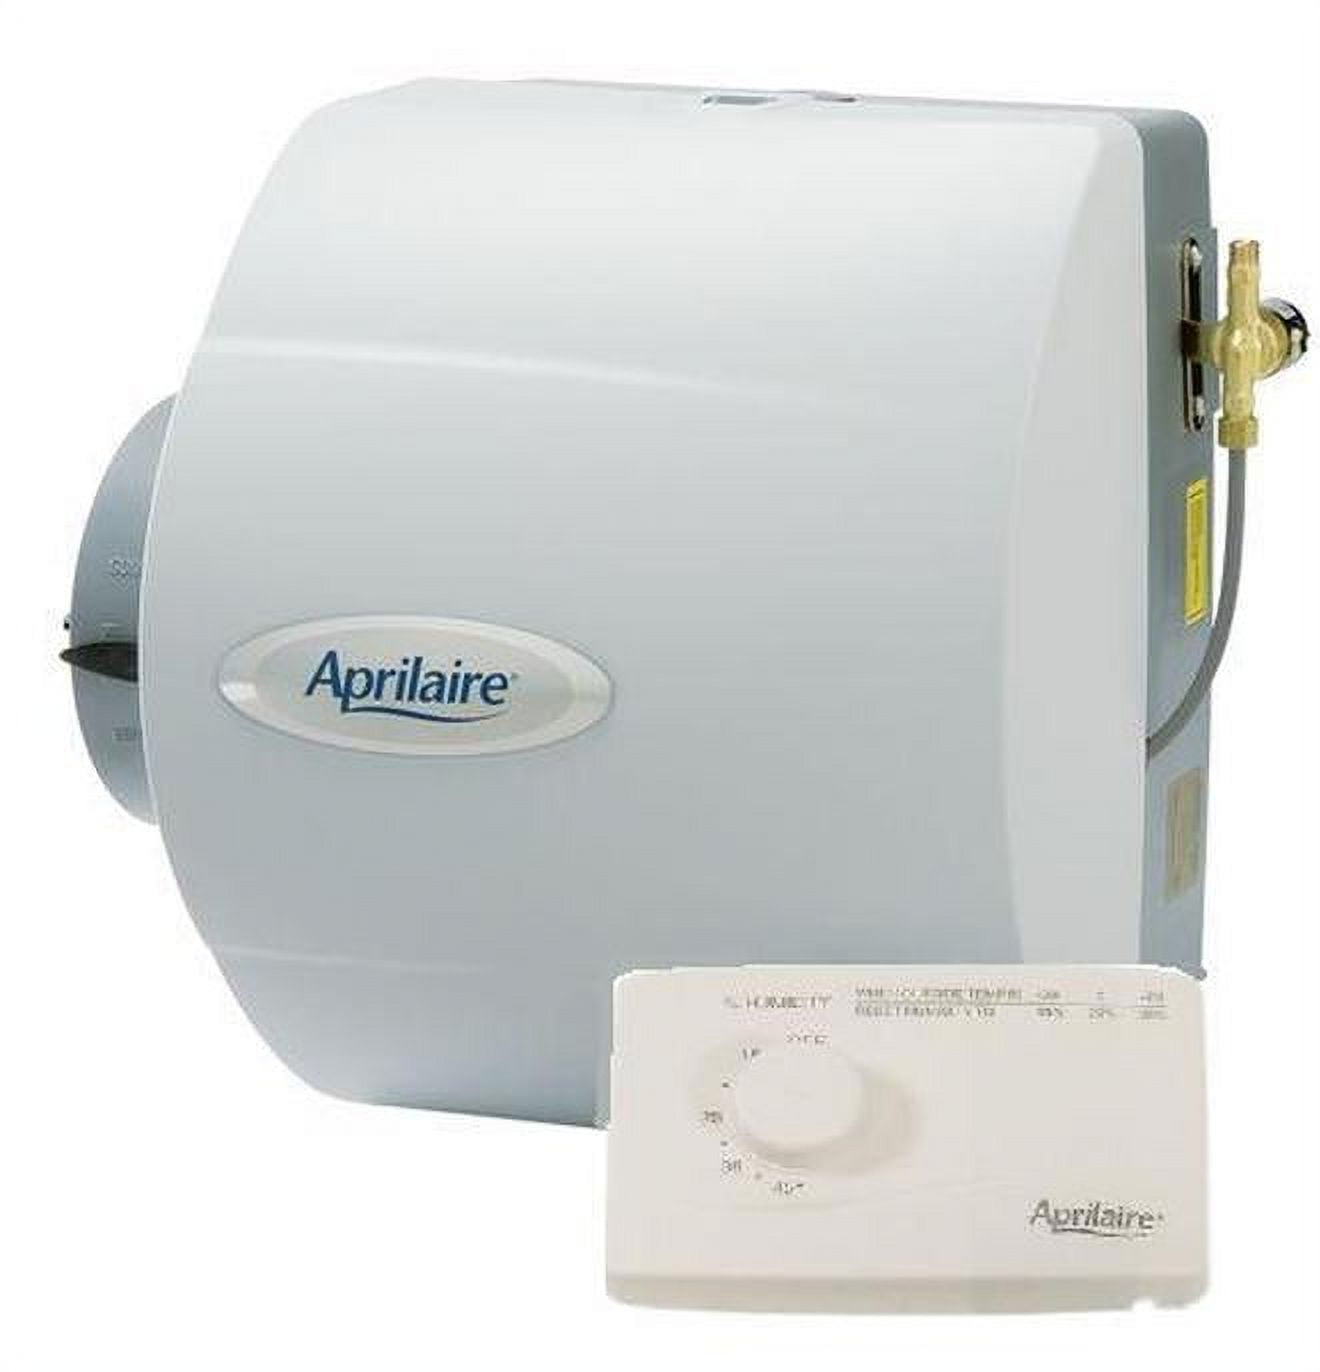 Aprilaire Model 600 Humidifier - Crestside Ballwin Heating & Cooling